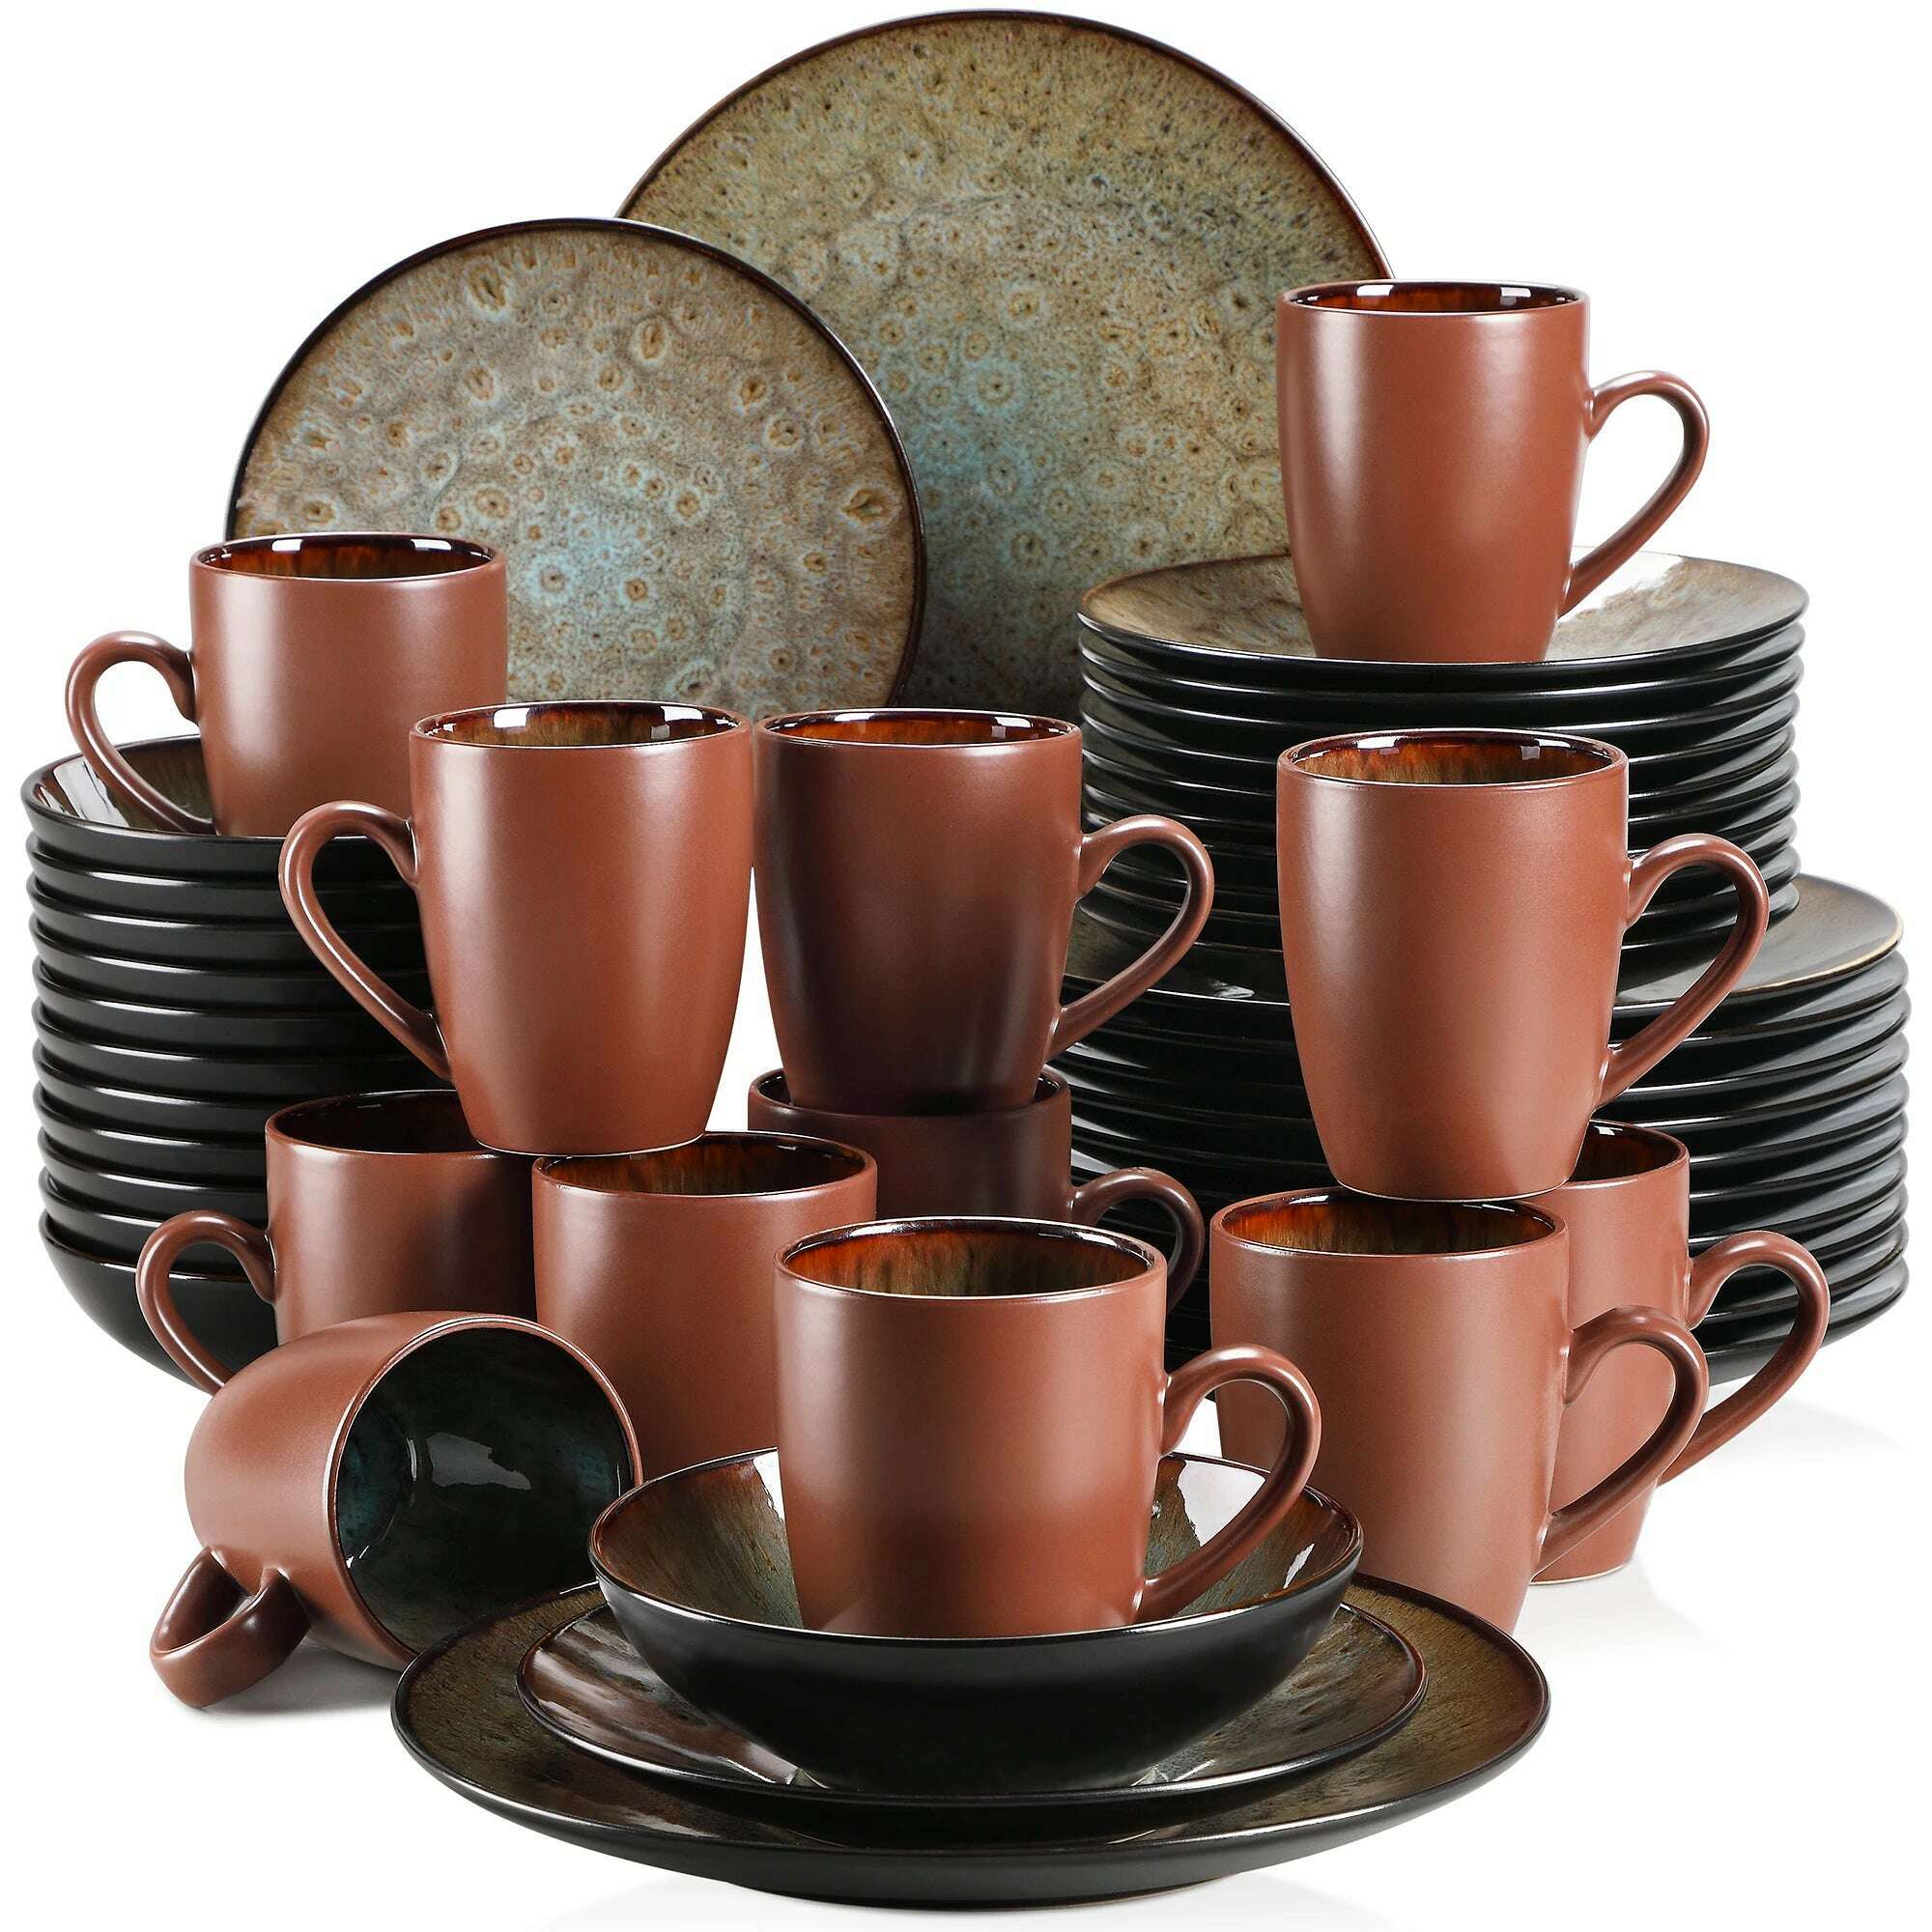 KIMLUD, VANCASSO BUBBLE 16/32/48-Piece Tableware Set Vintage Ceramic Blue/Brown Stoneware Set with Dinner&Dessert Plate,Bowl,Coffee Cups, Brown-48-Piece / GERMANY, KIMLUD Womens Clothes